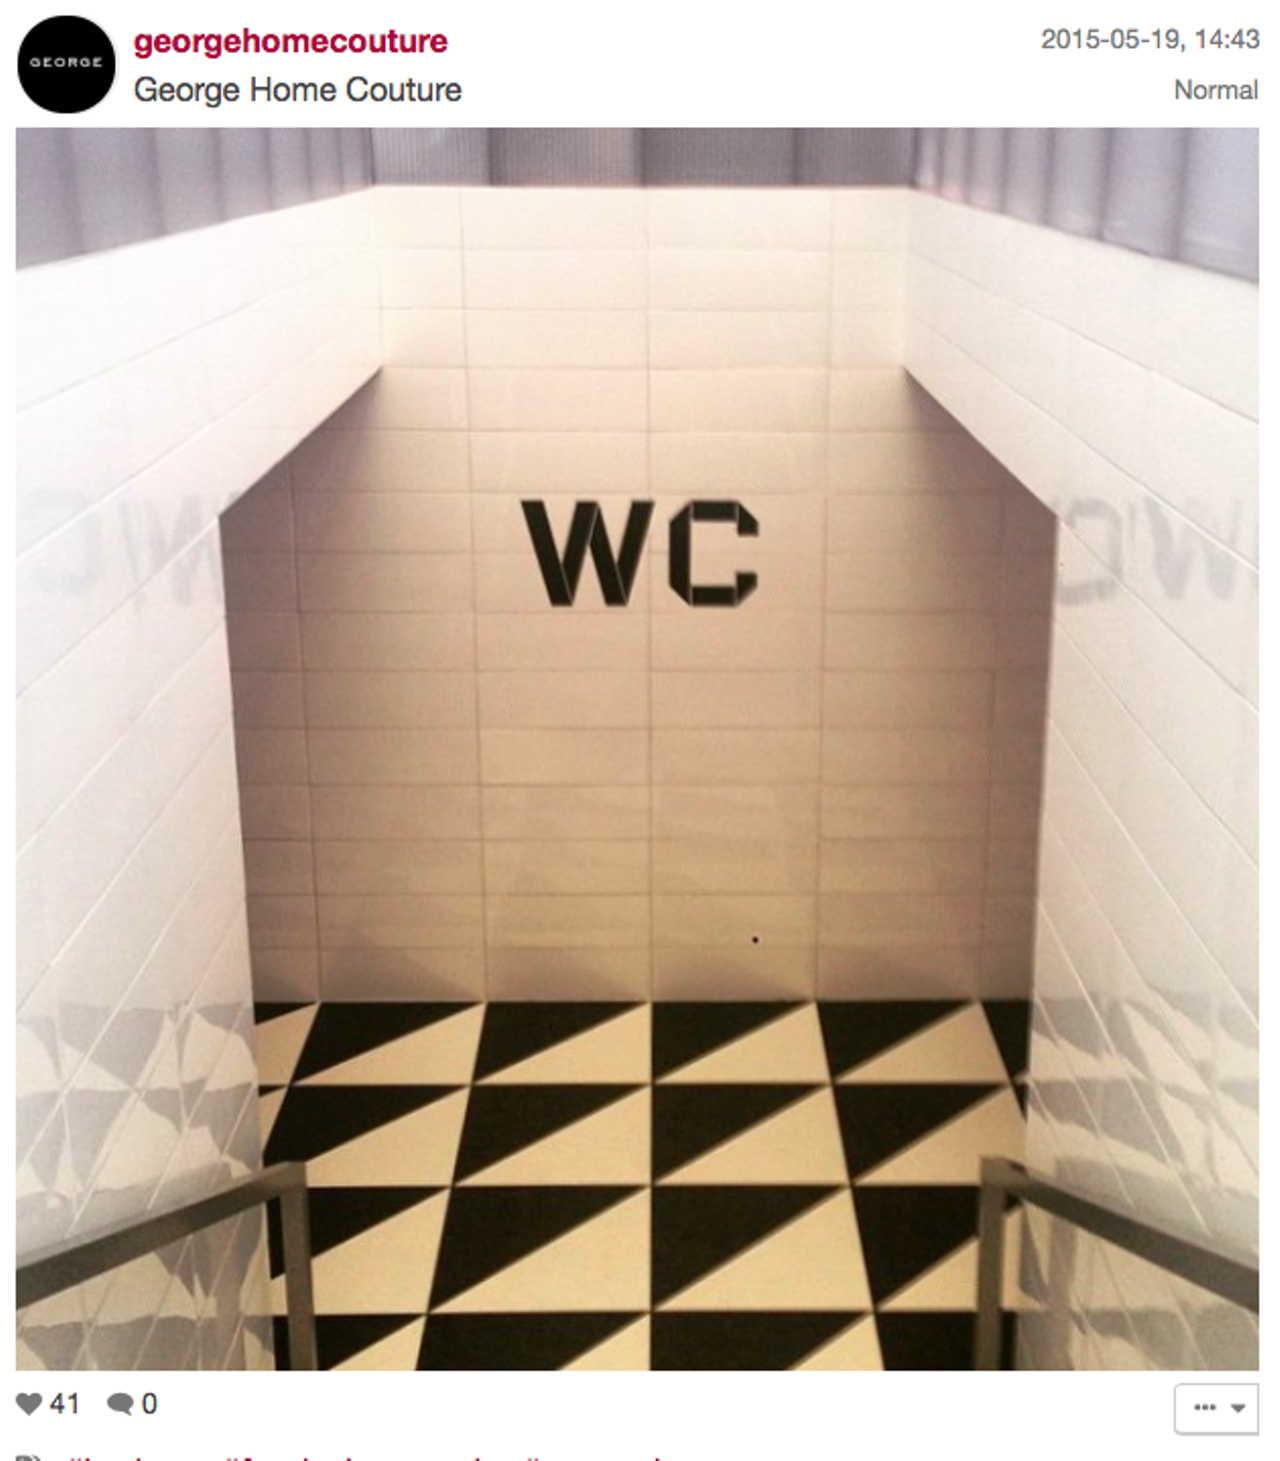 Seriously? Even the entrance to the toilets is Margot Tenenbaum-worthy. (That tilework!)